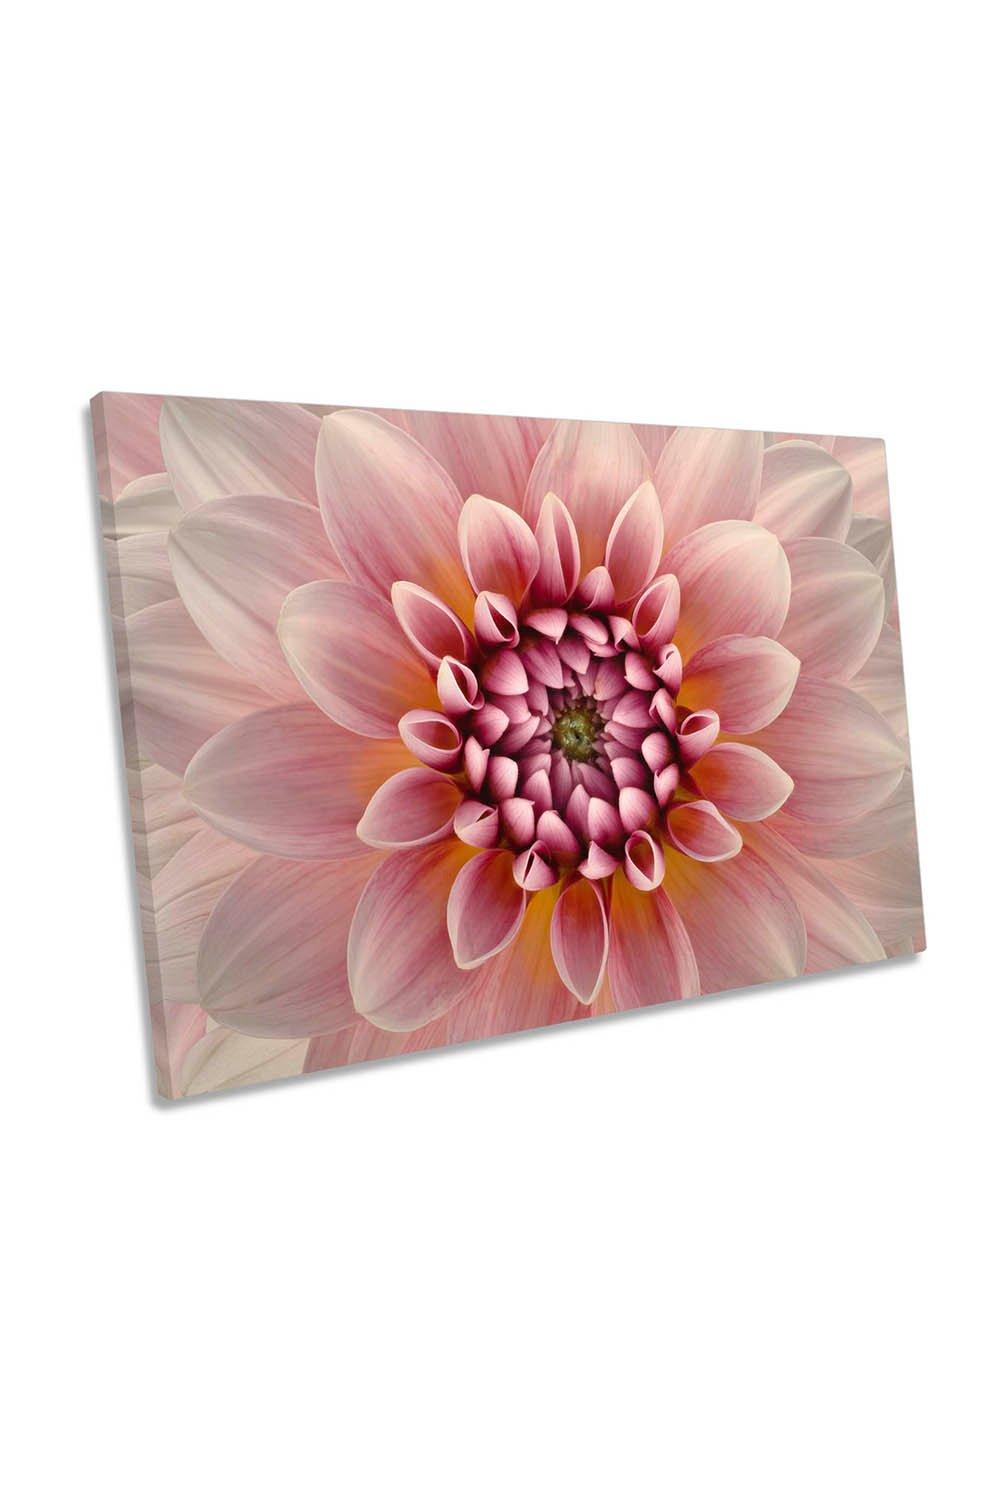 Blush Pink Dahlia Flower Floral Canvas Wall Art Picture Print